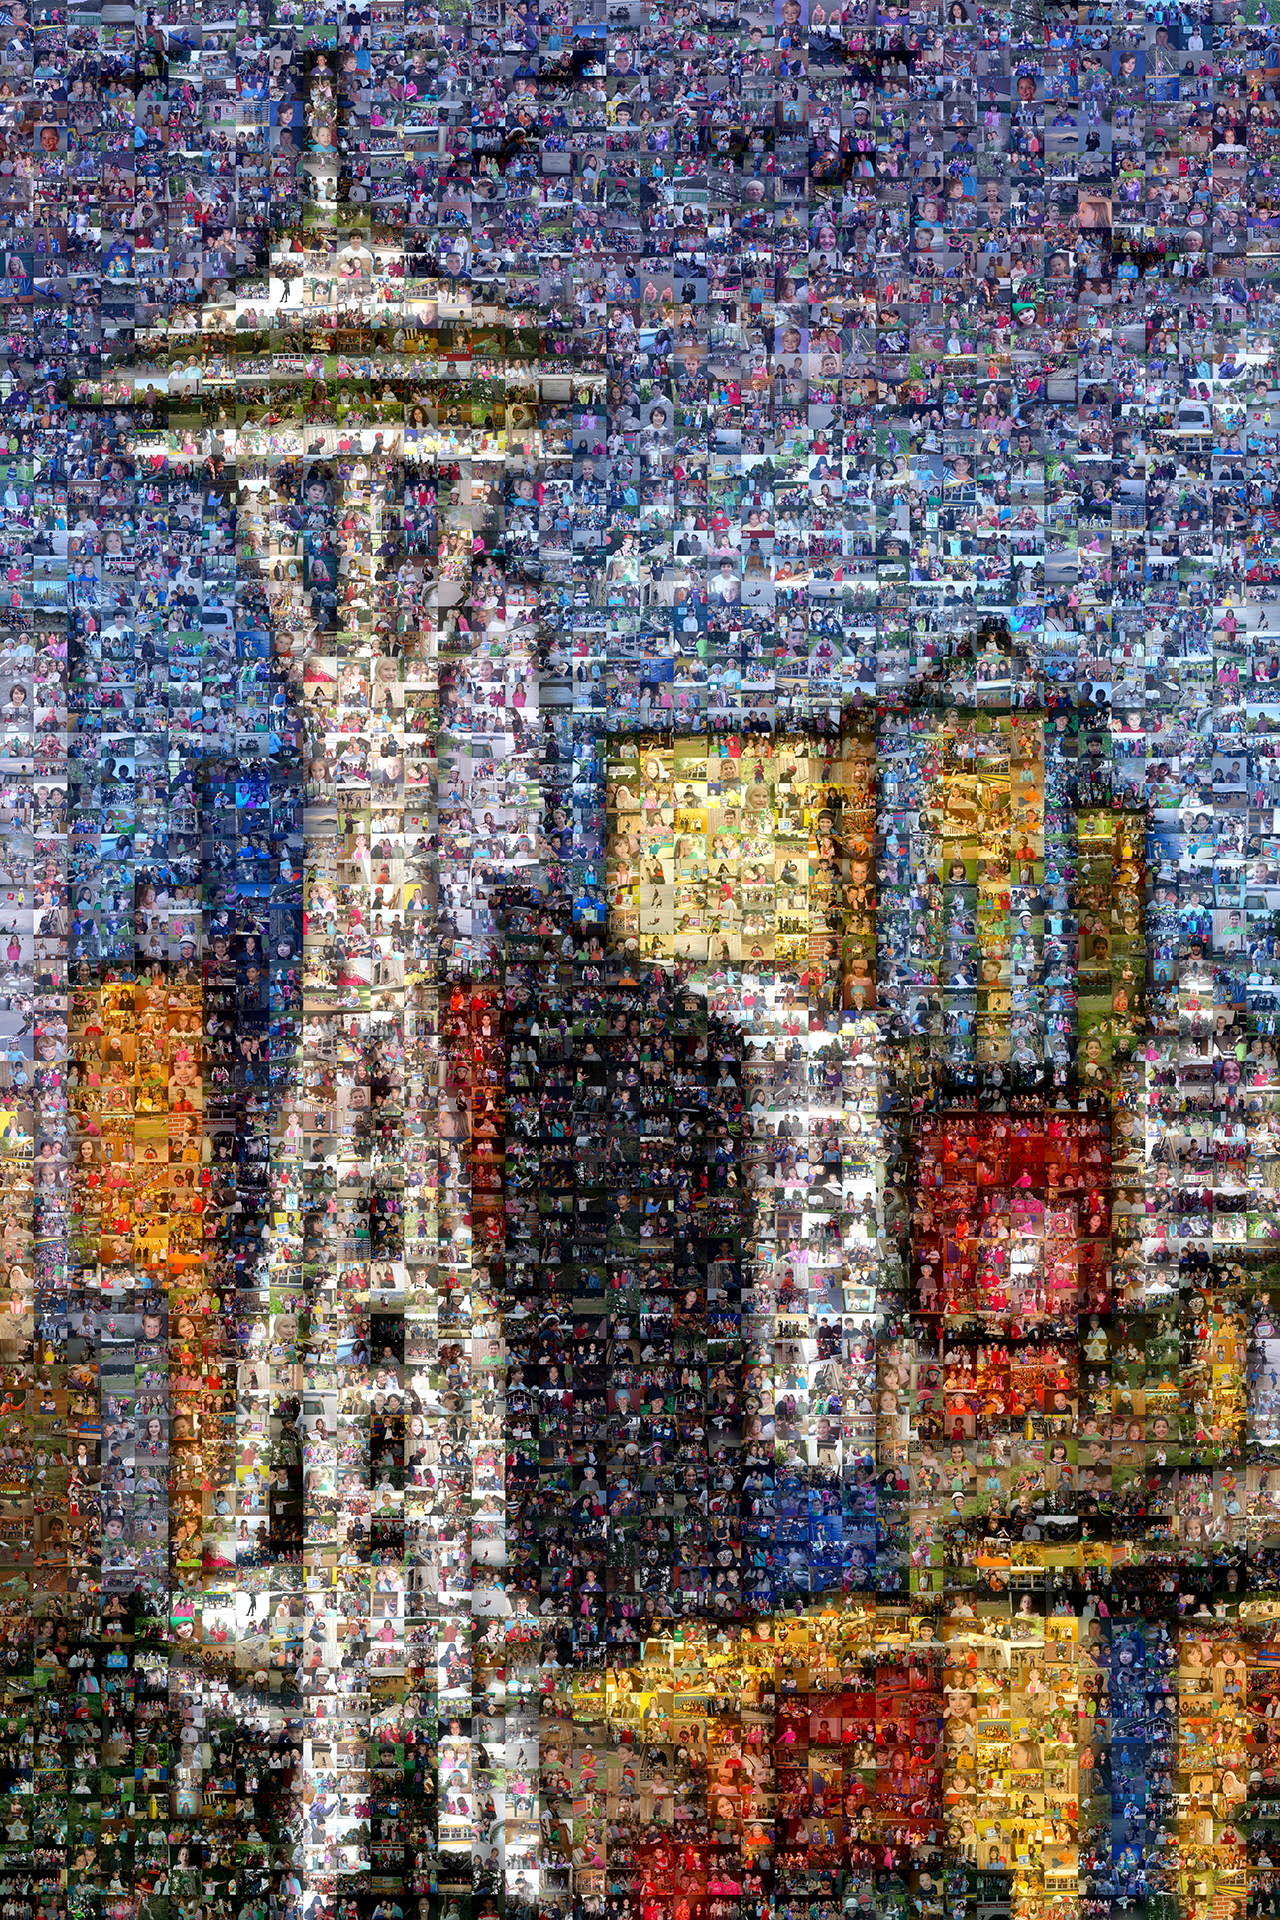 photo mosaic created using 1323 photos each only used once